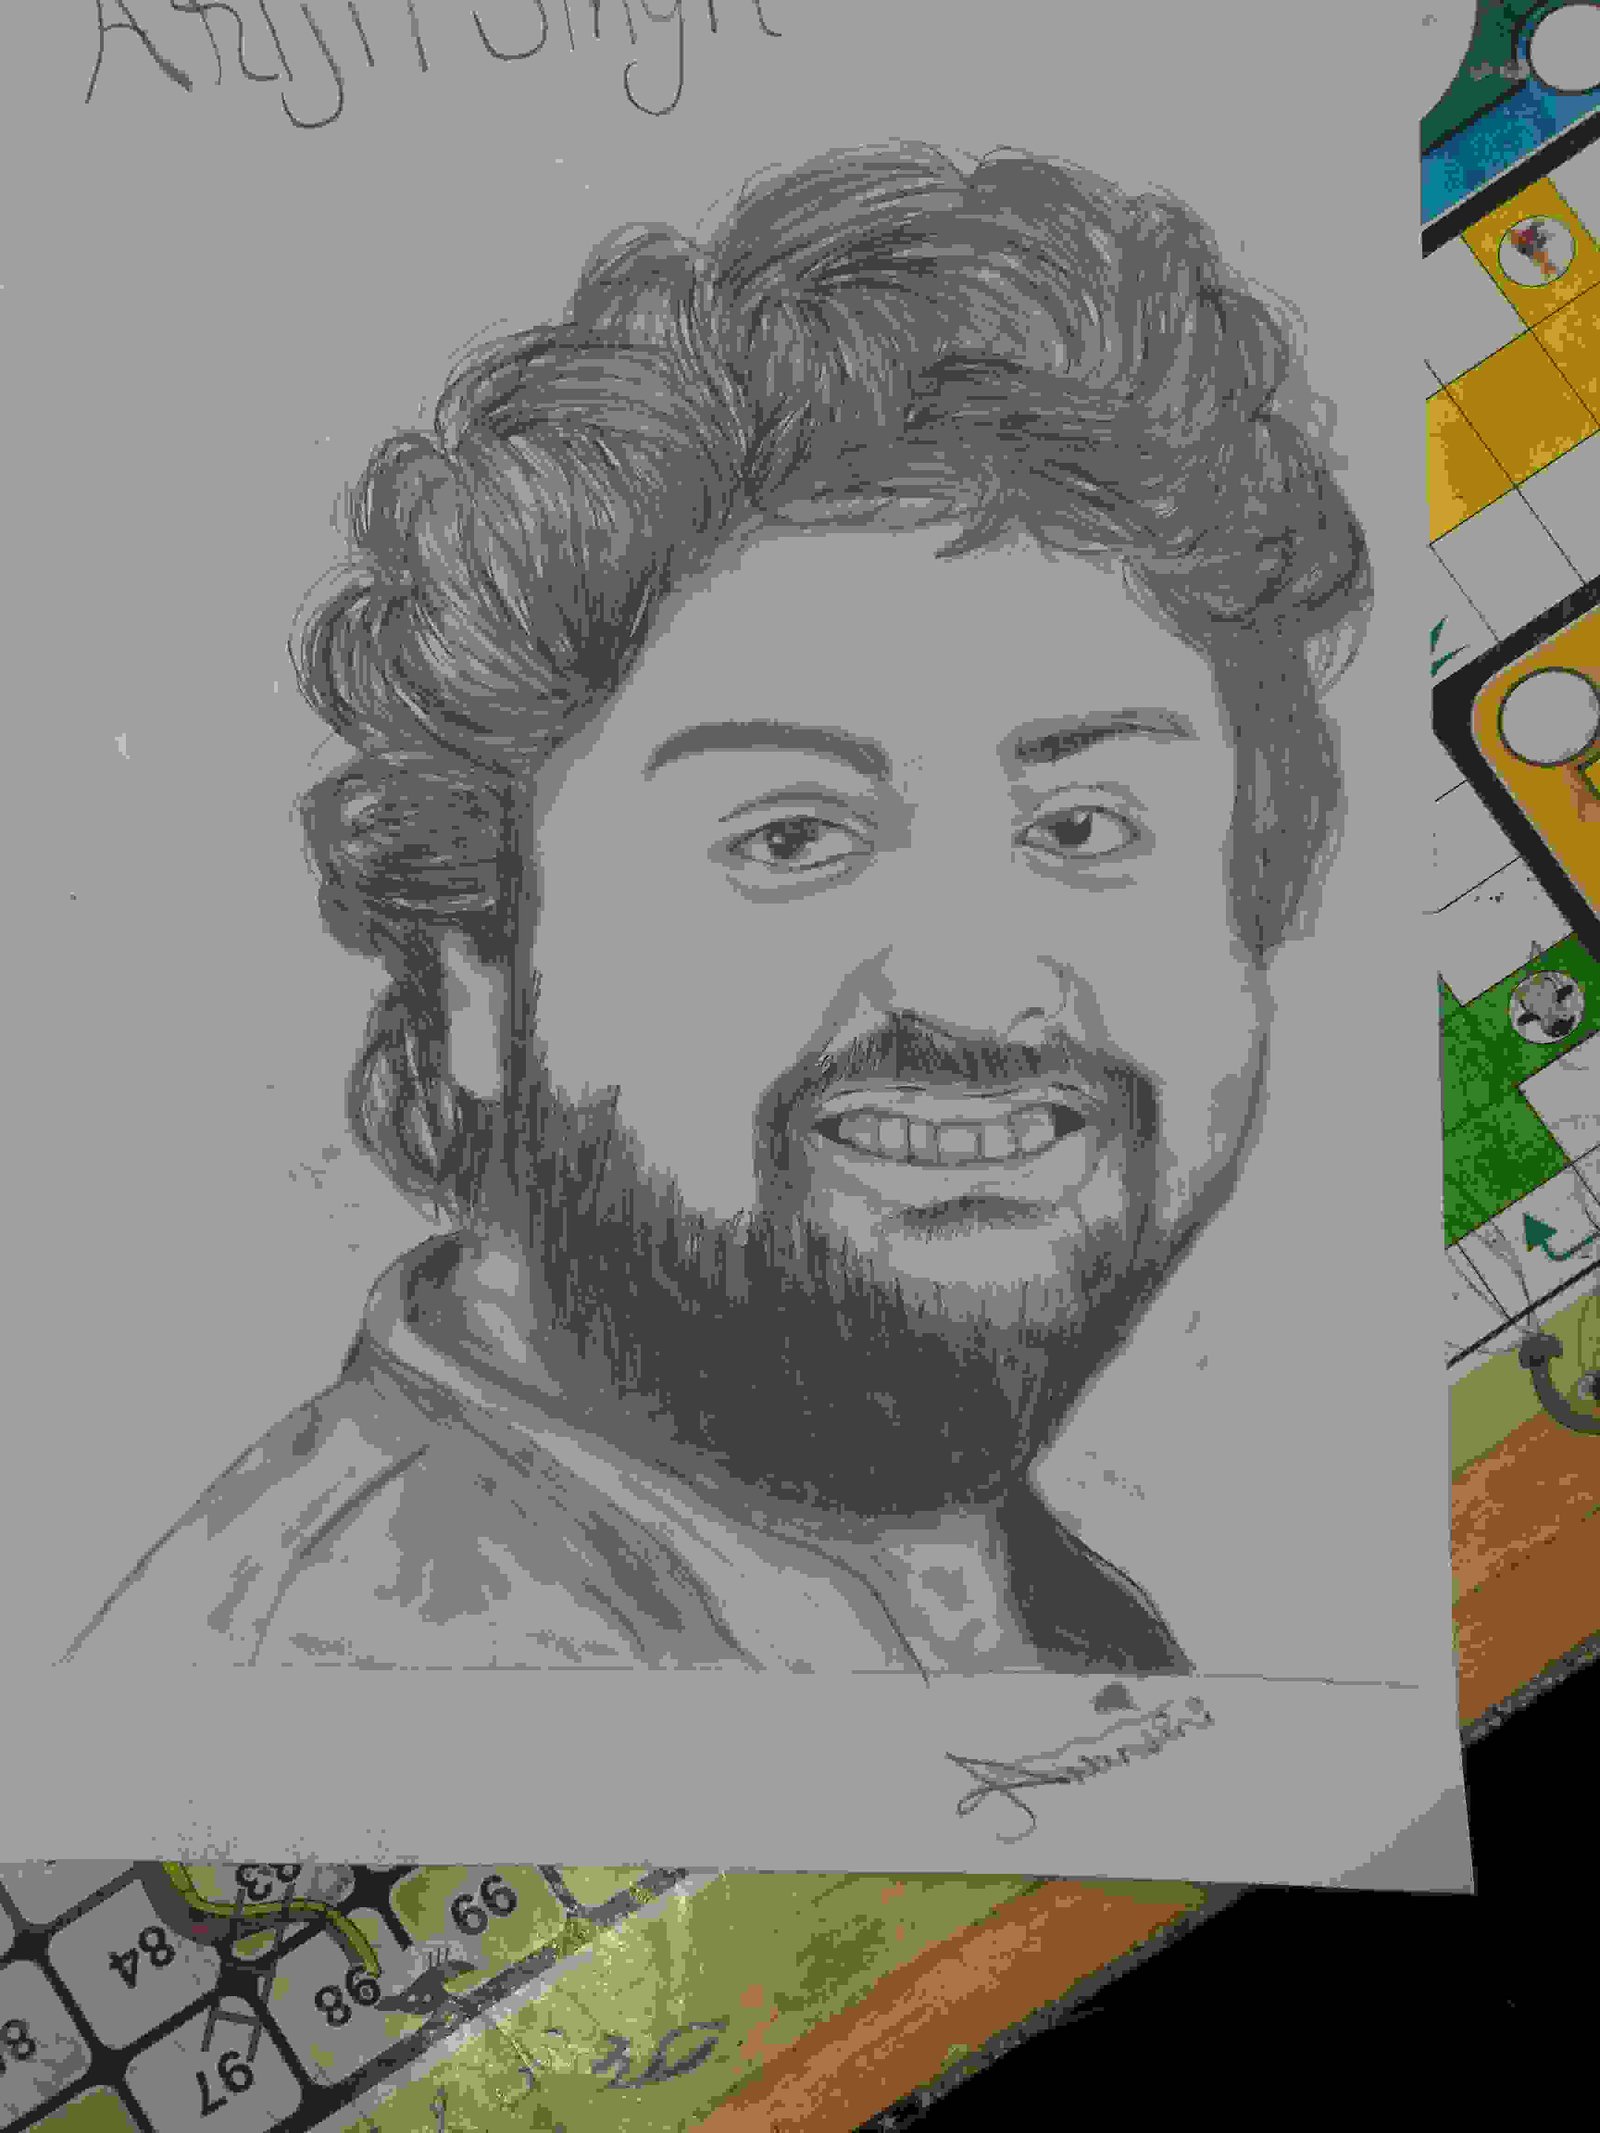 Painting Of Arijit Singh Sketch In Sketching Size A4 Sq Cm